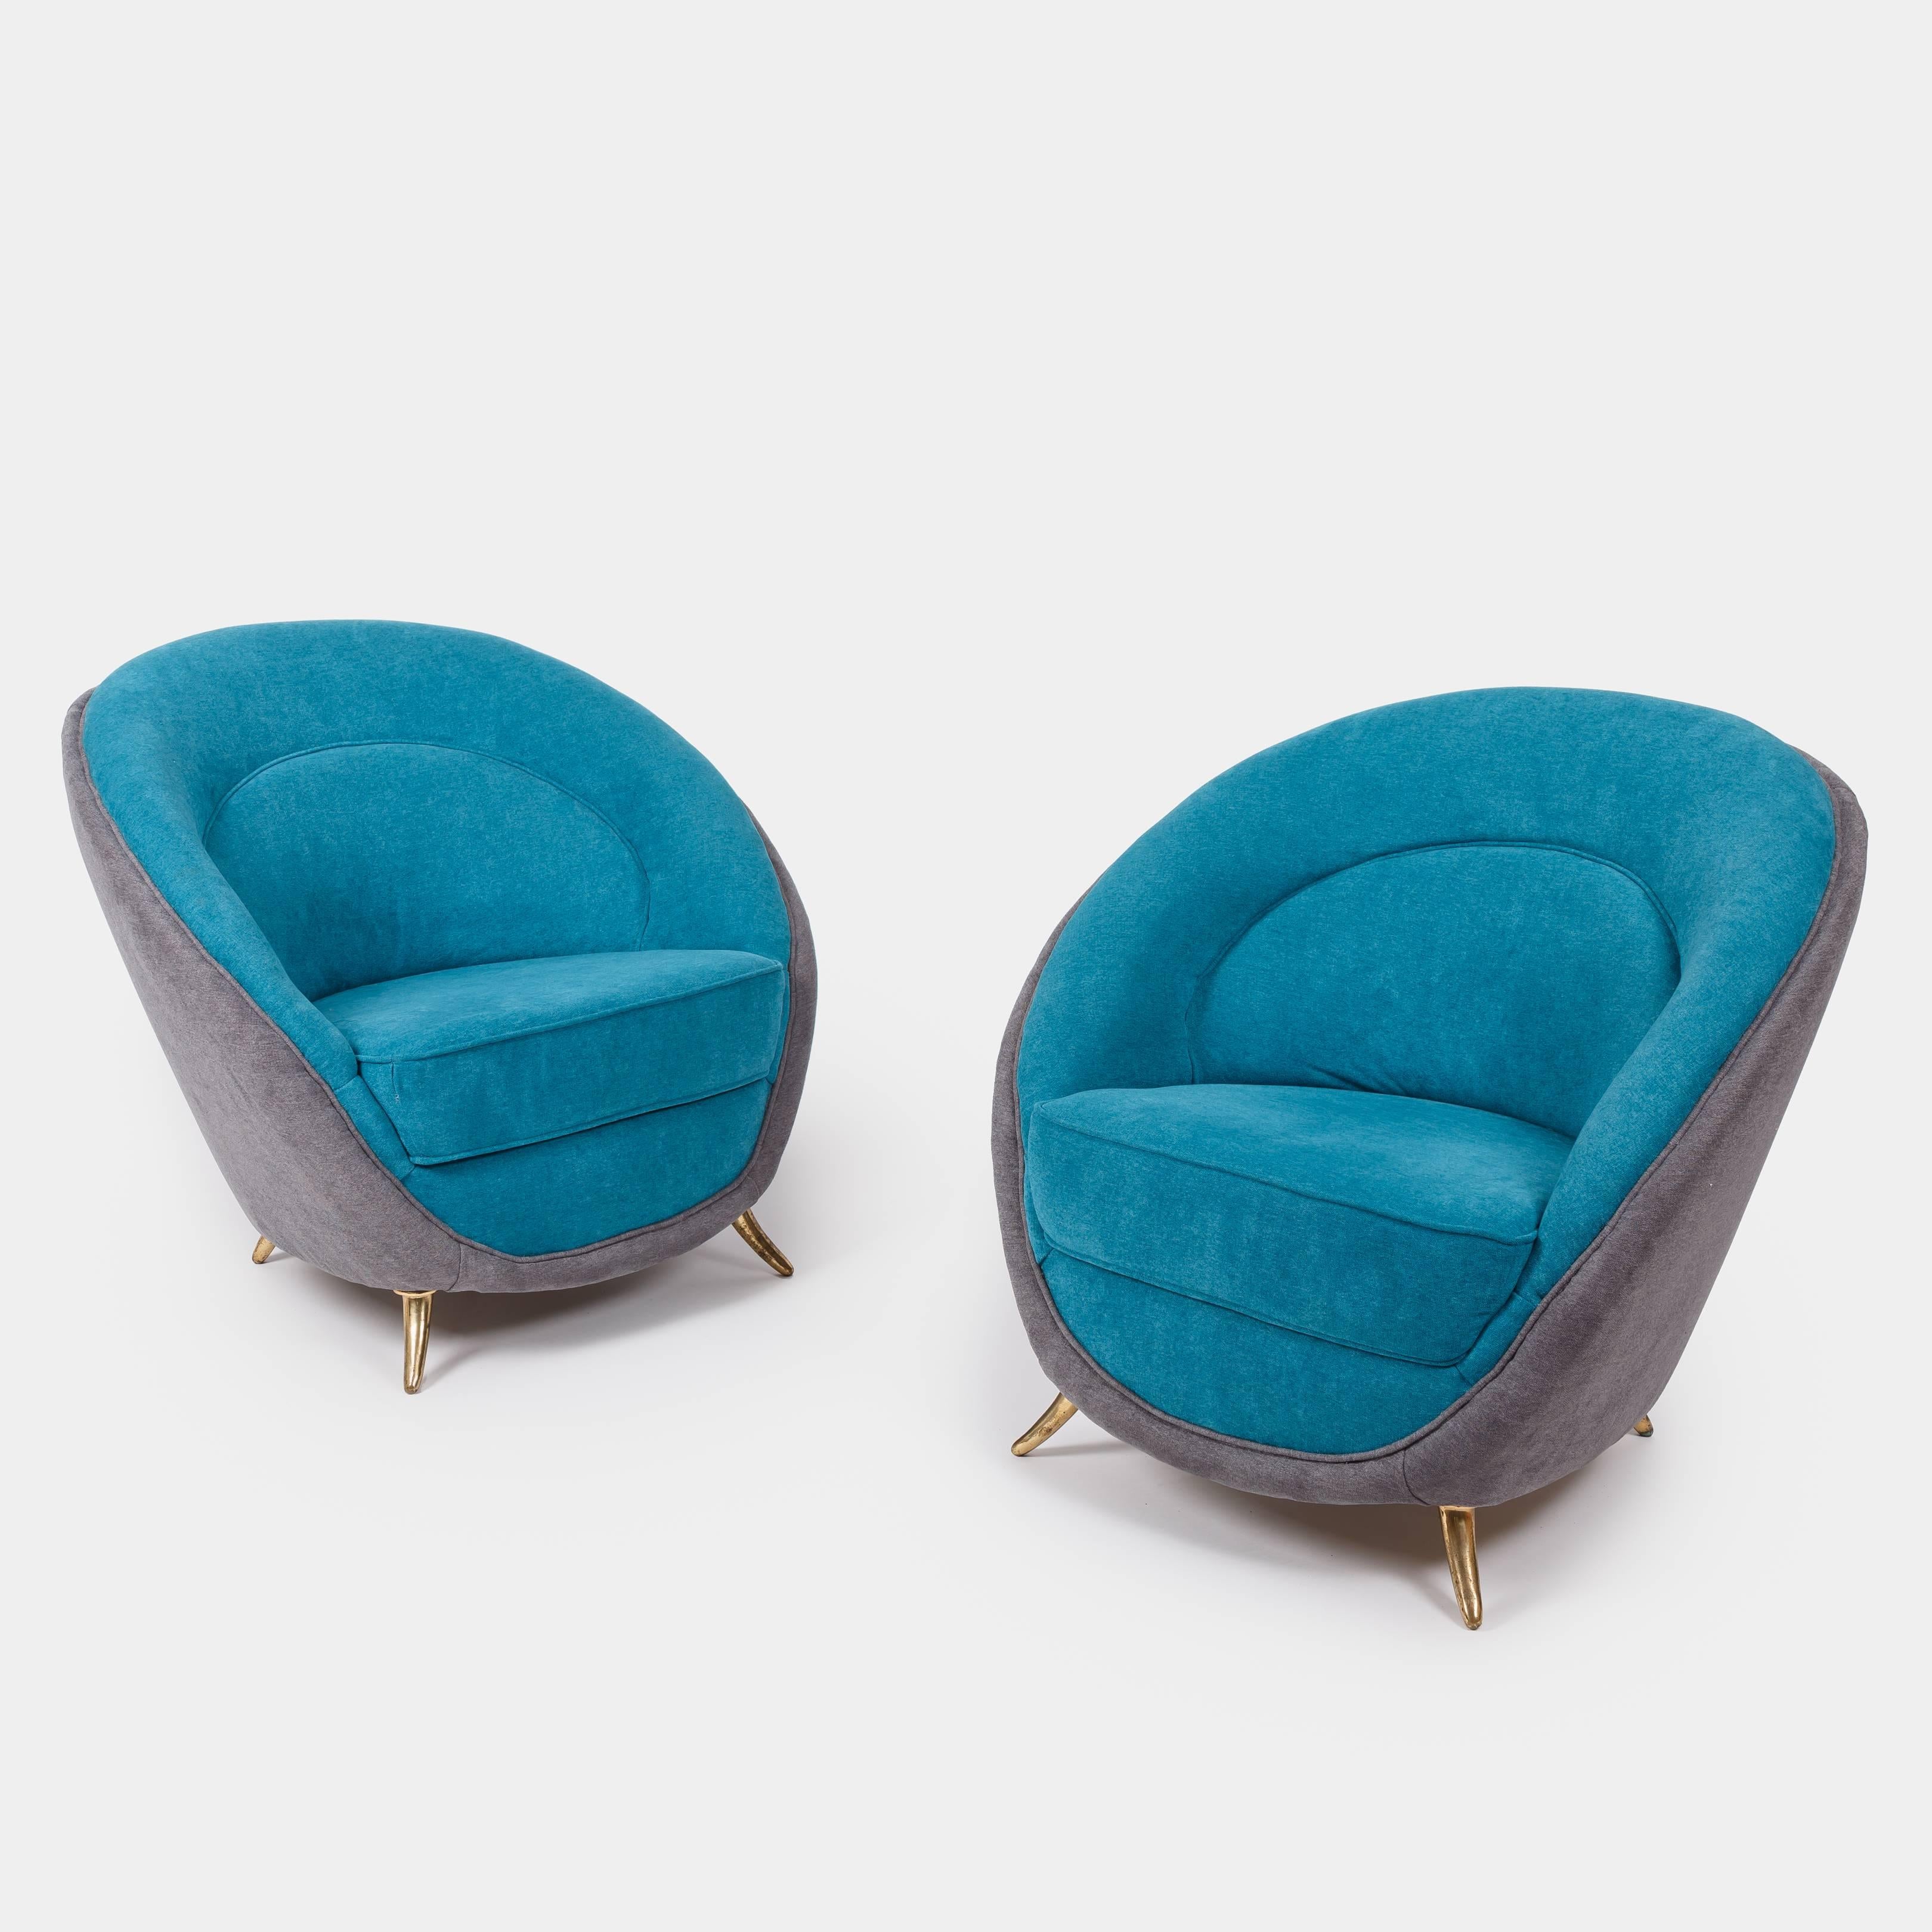 Designed by Guglielmo Veronesi for ISA Bergamo, this pair of beautifully curved back armchairs ends on patinated brass legs, Italy, 1950s.
Restored and newly upholstered.